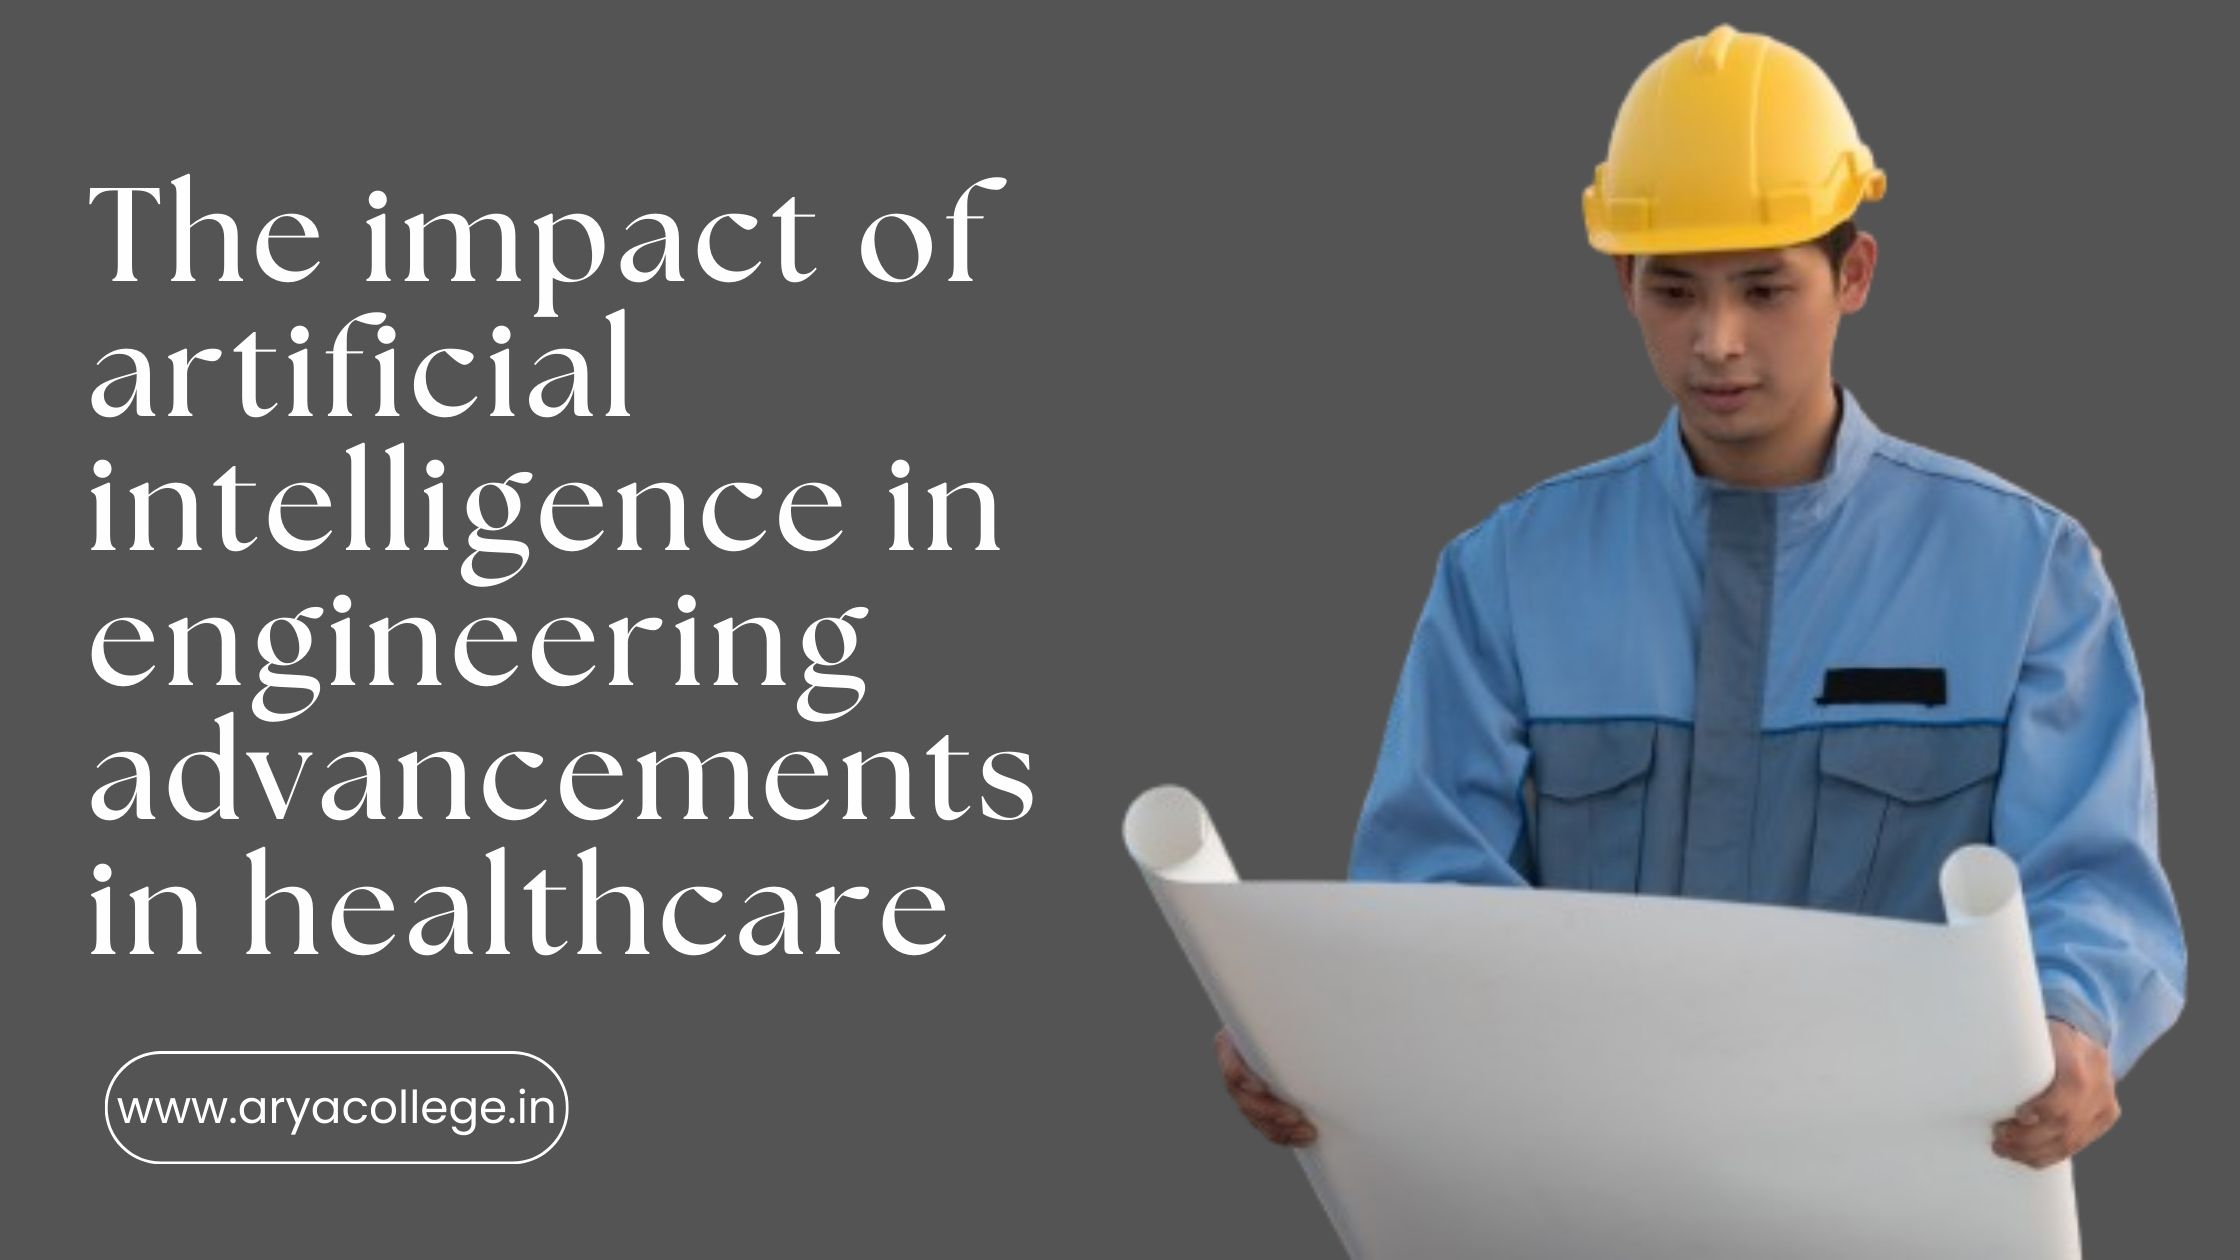 The impact of artificial intelligence in engineering advancements in healthcare